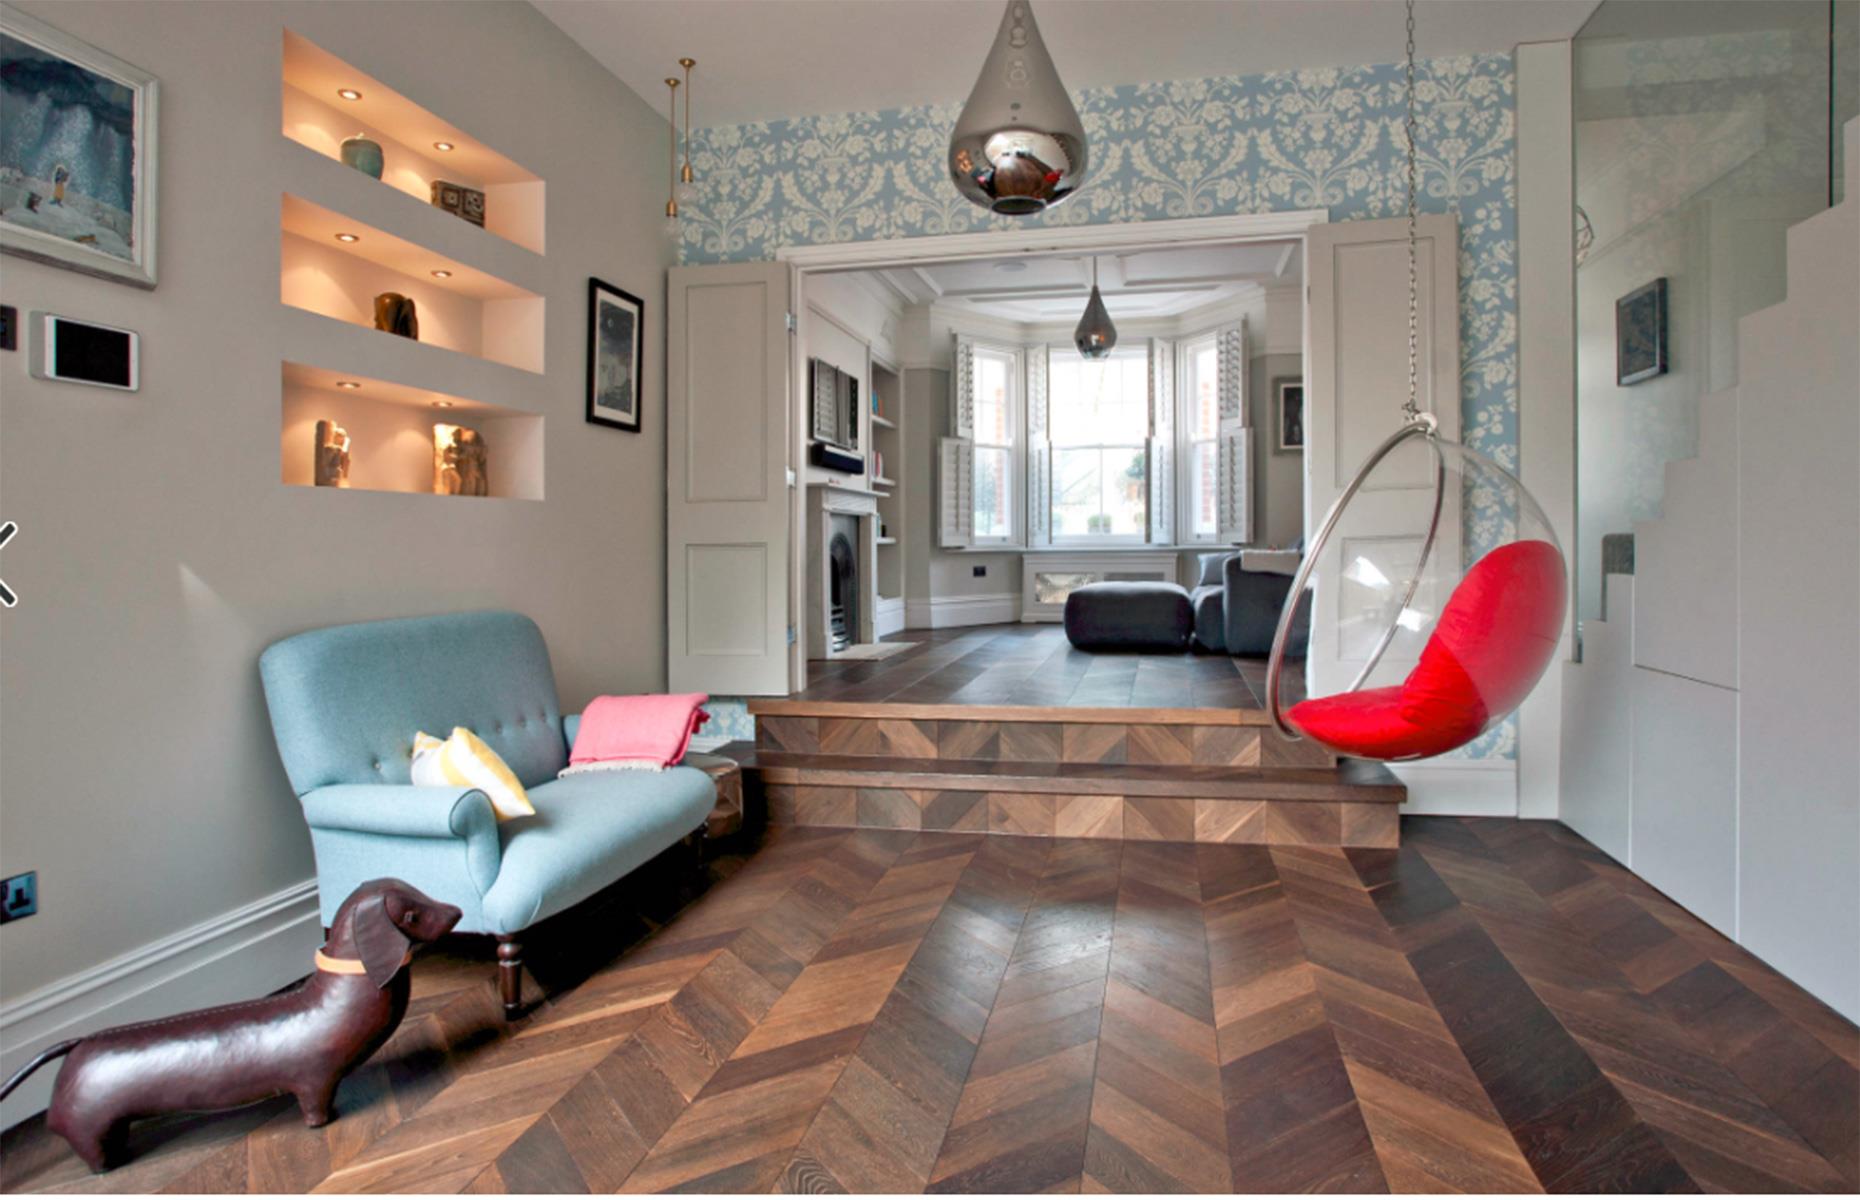 A contemporary living room with dark wood parquet floor